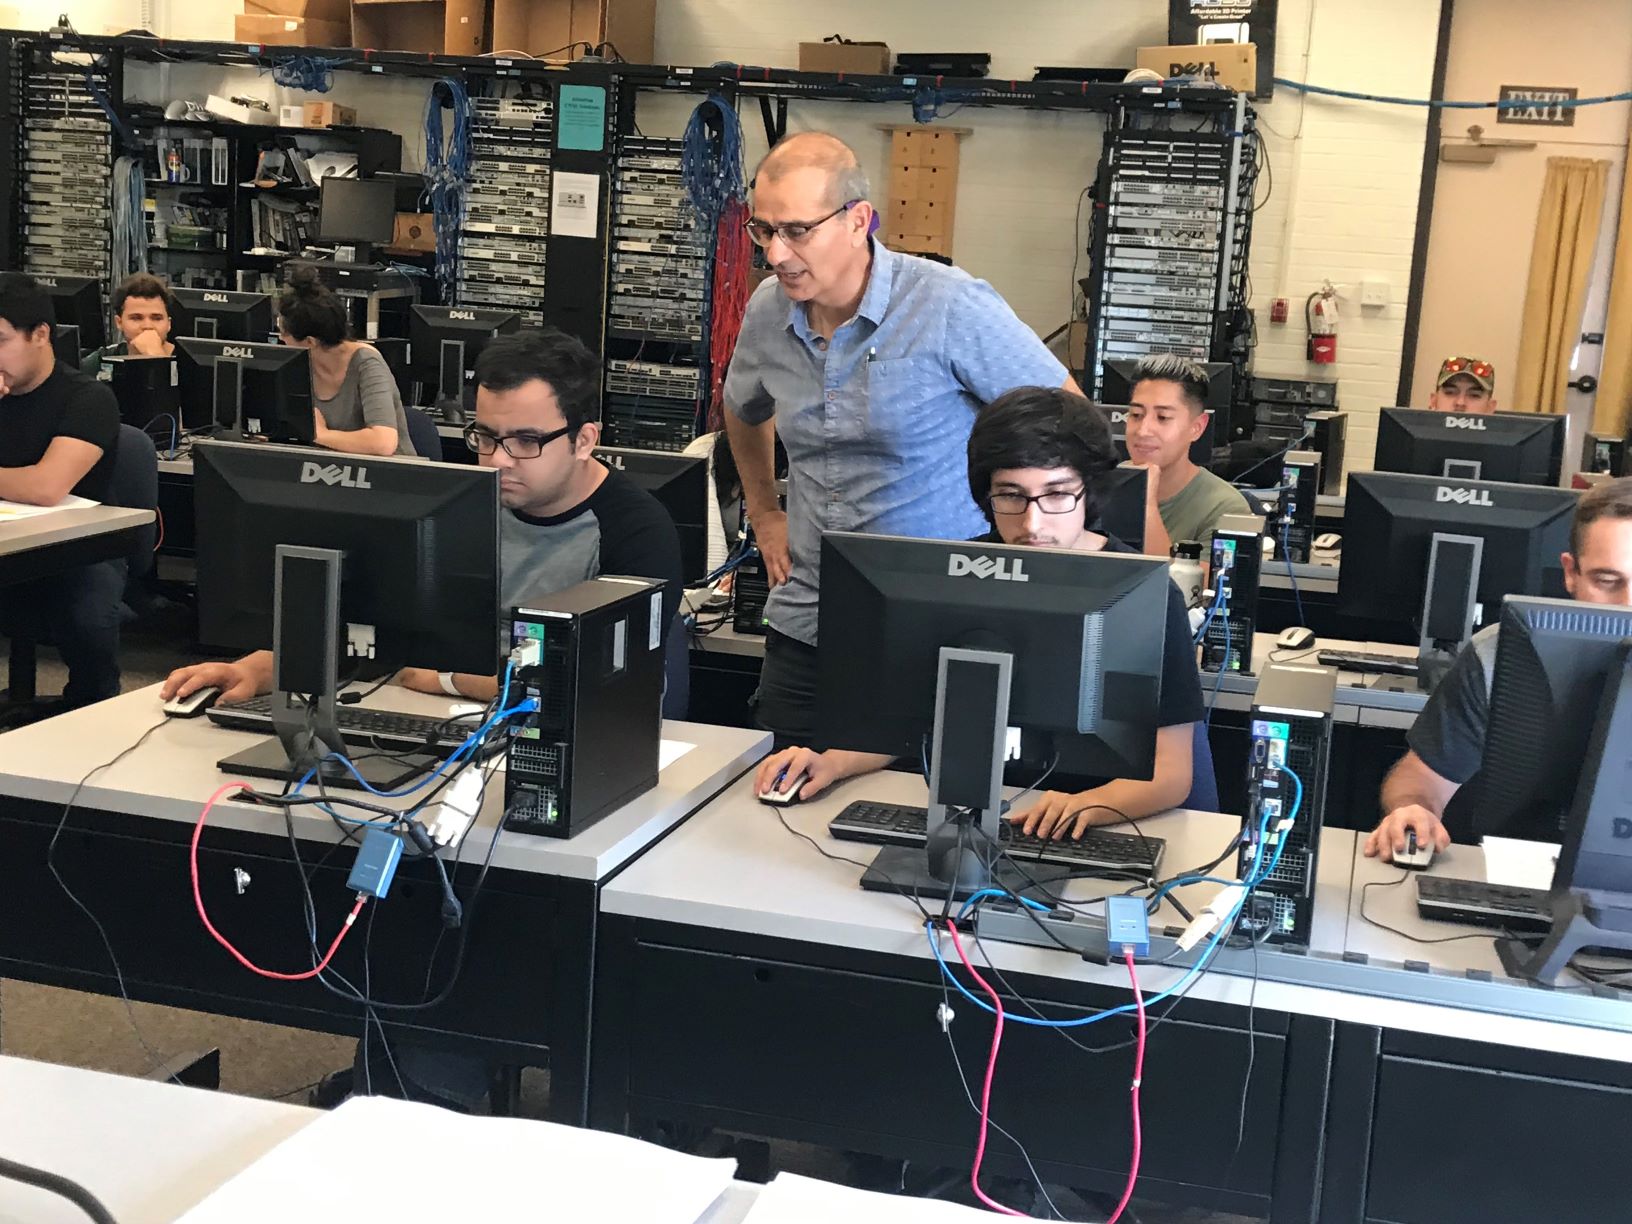 computer networking class at moorpark college. the instructor is helping students at their computers